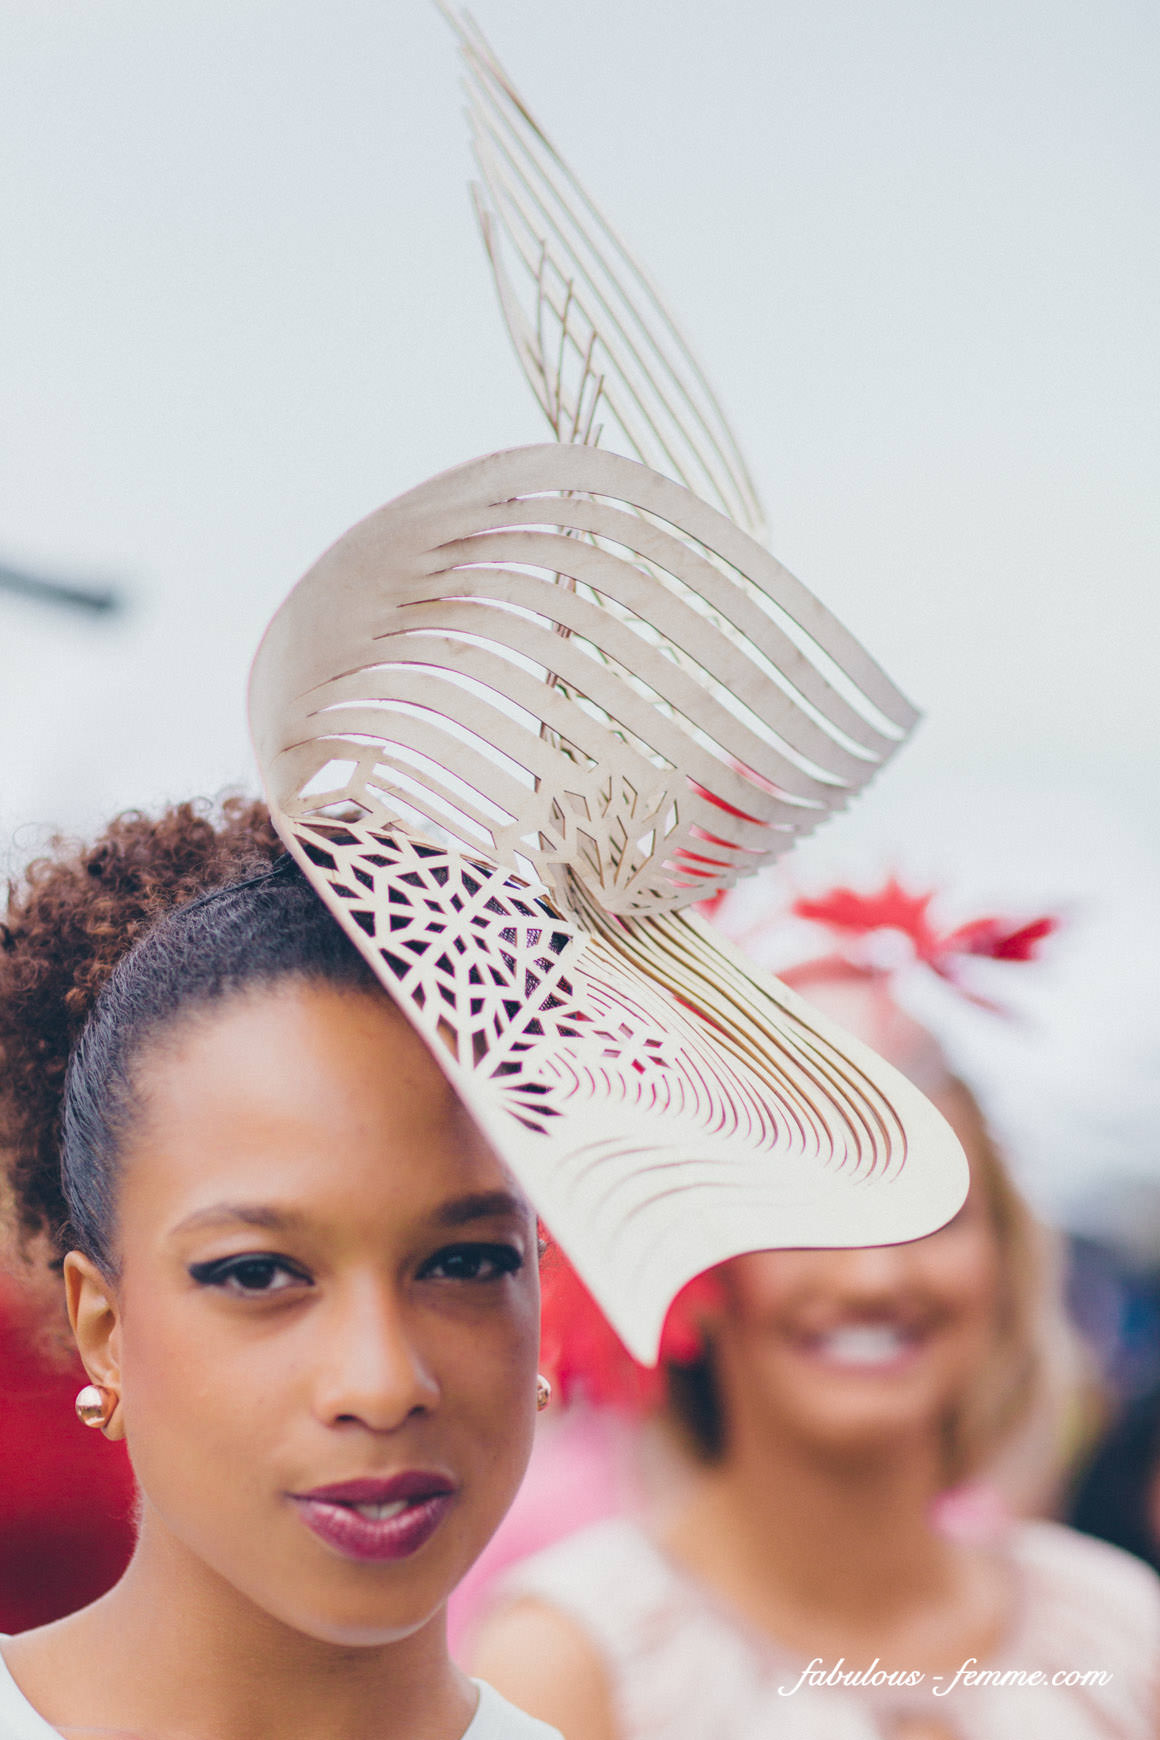 millinery - winner fashions on the field mikllinery and designer award